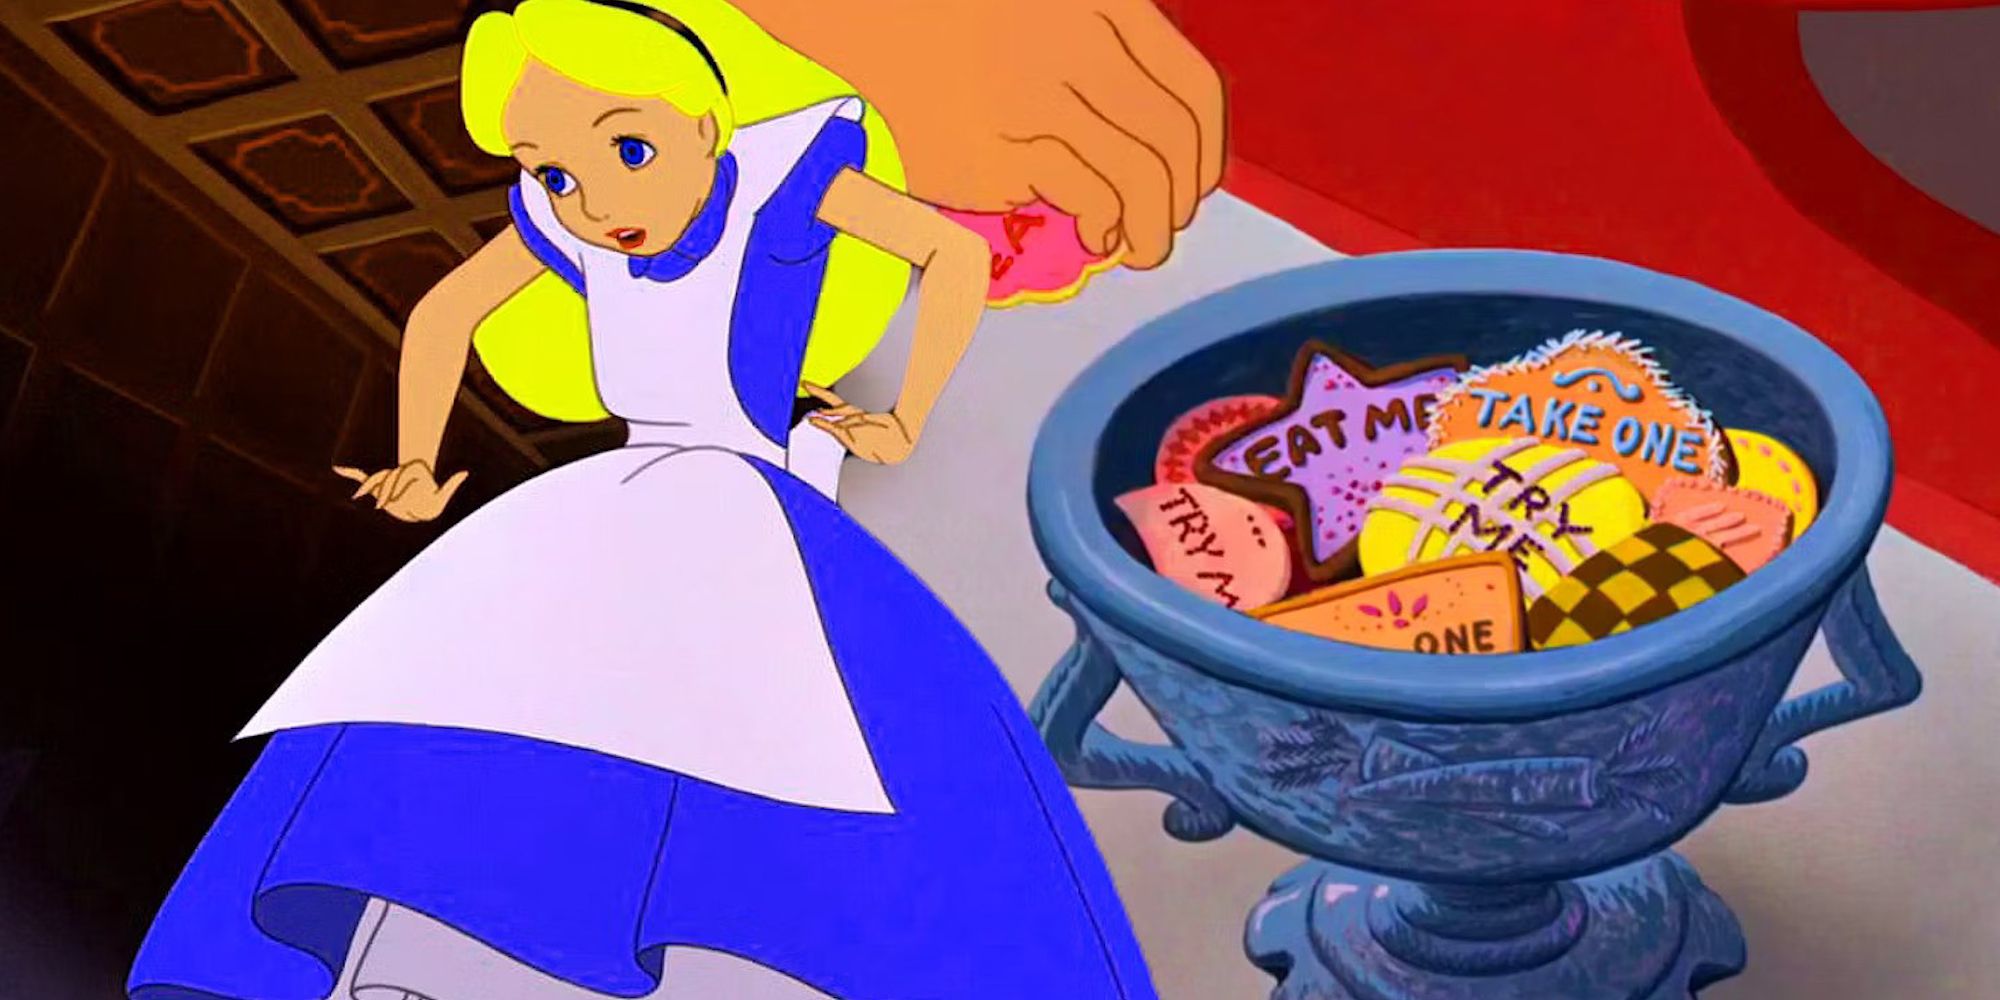 Blended image showing Alice and the Eat-Me cookies on a plate.